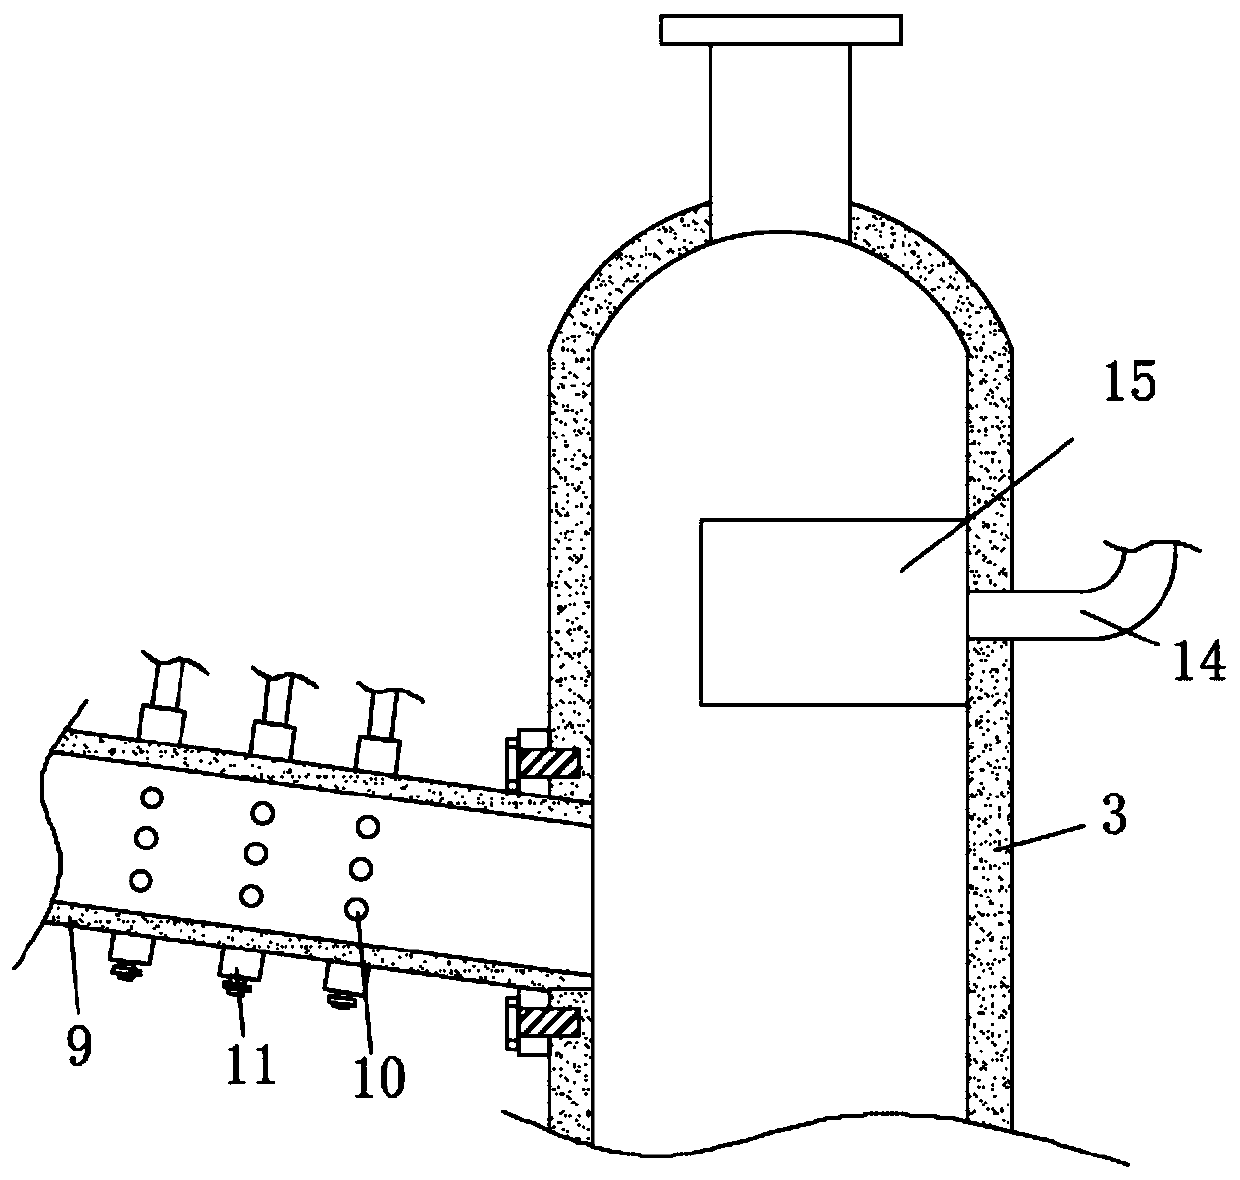 Dry process cement plant flue gas wet desulfurization device and method